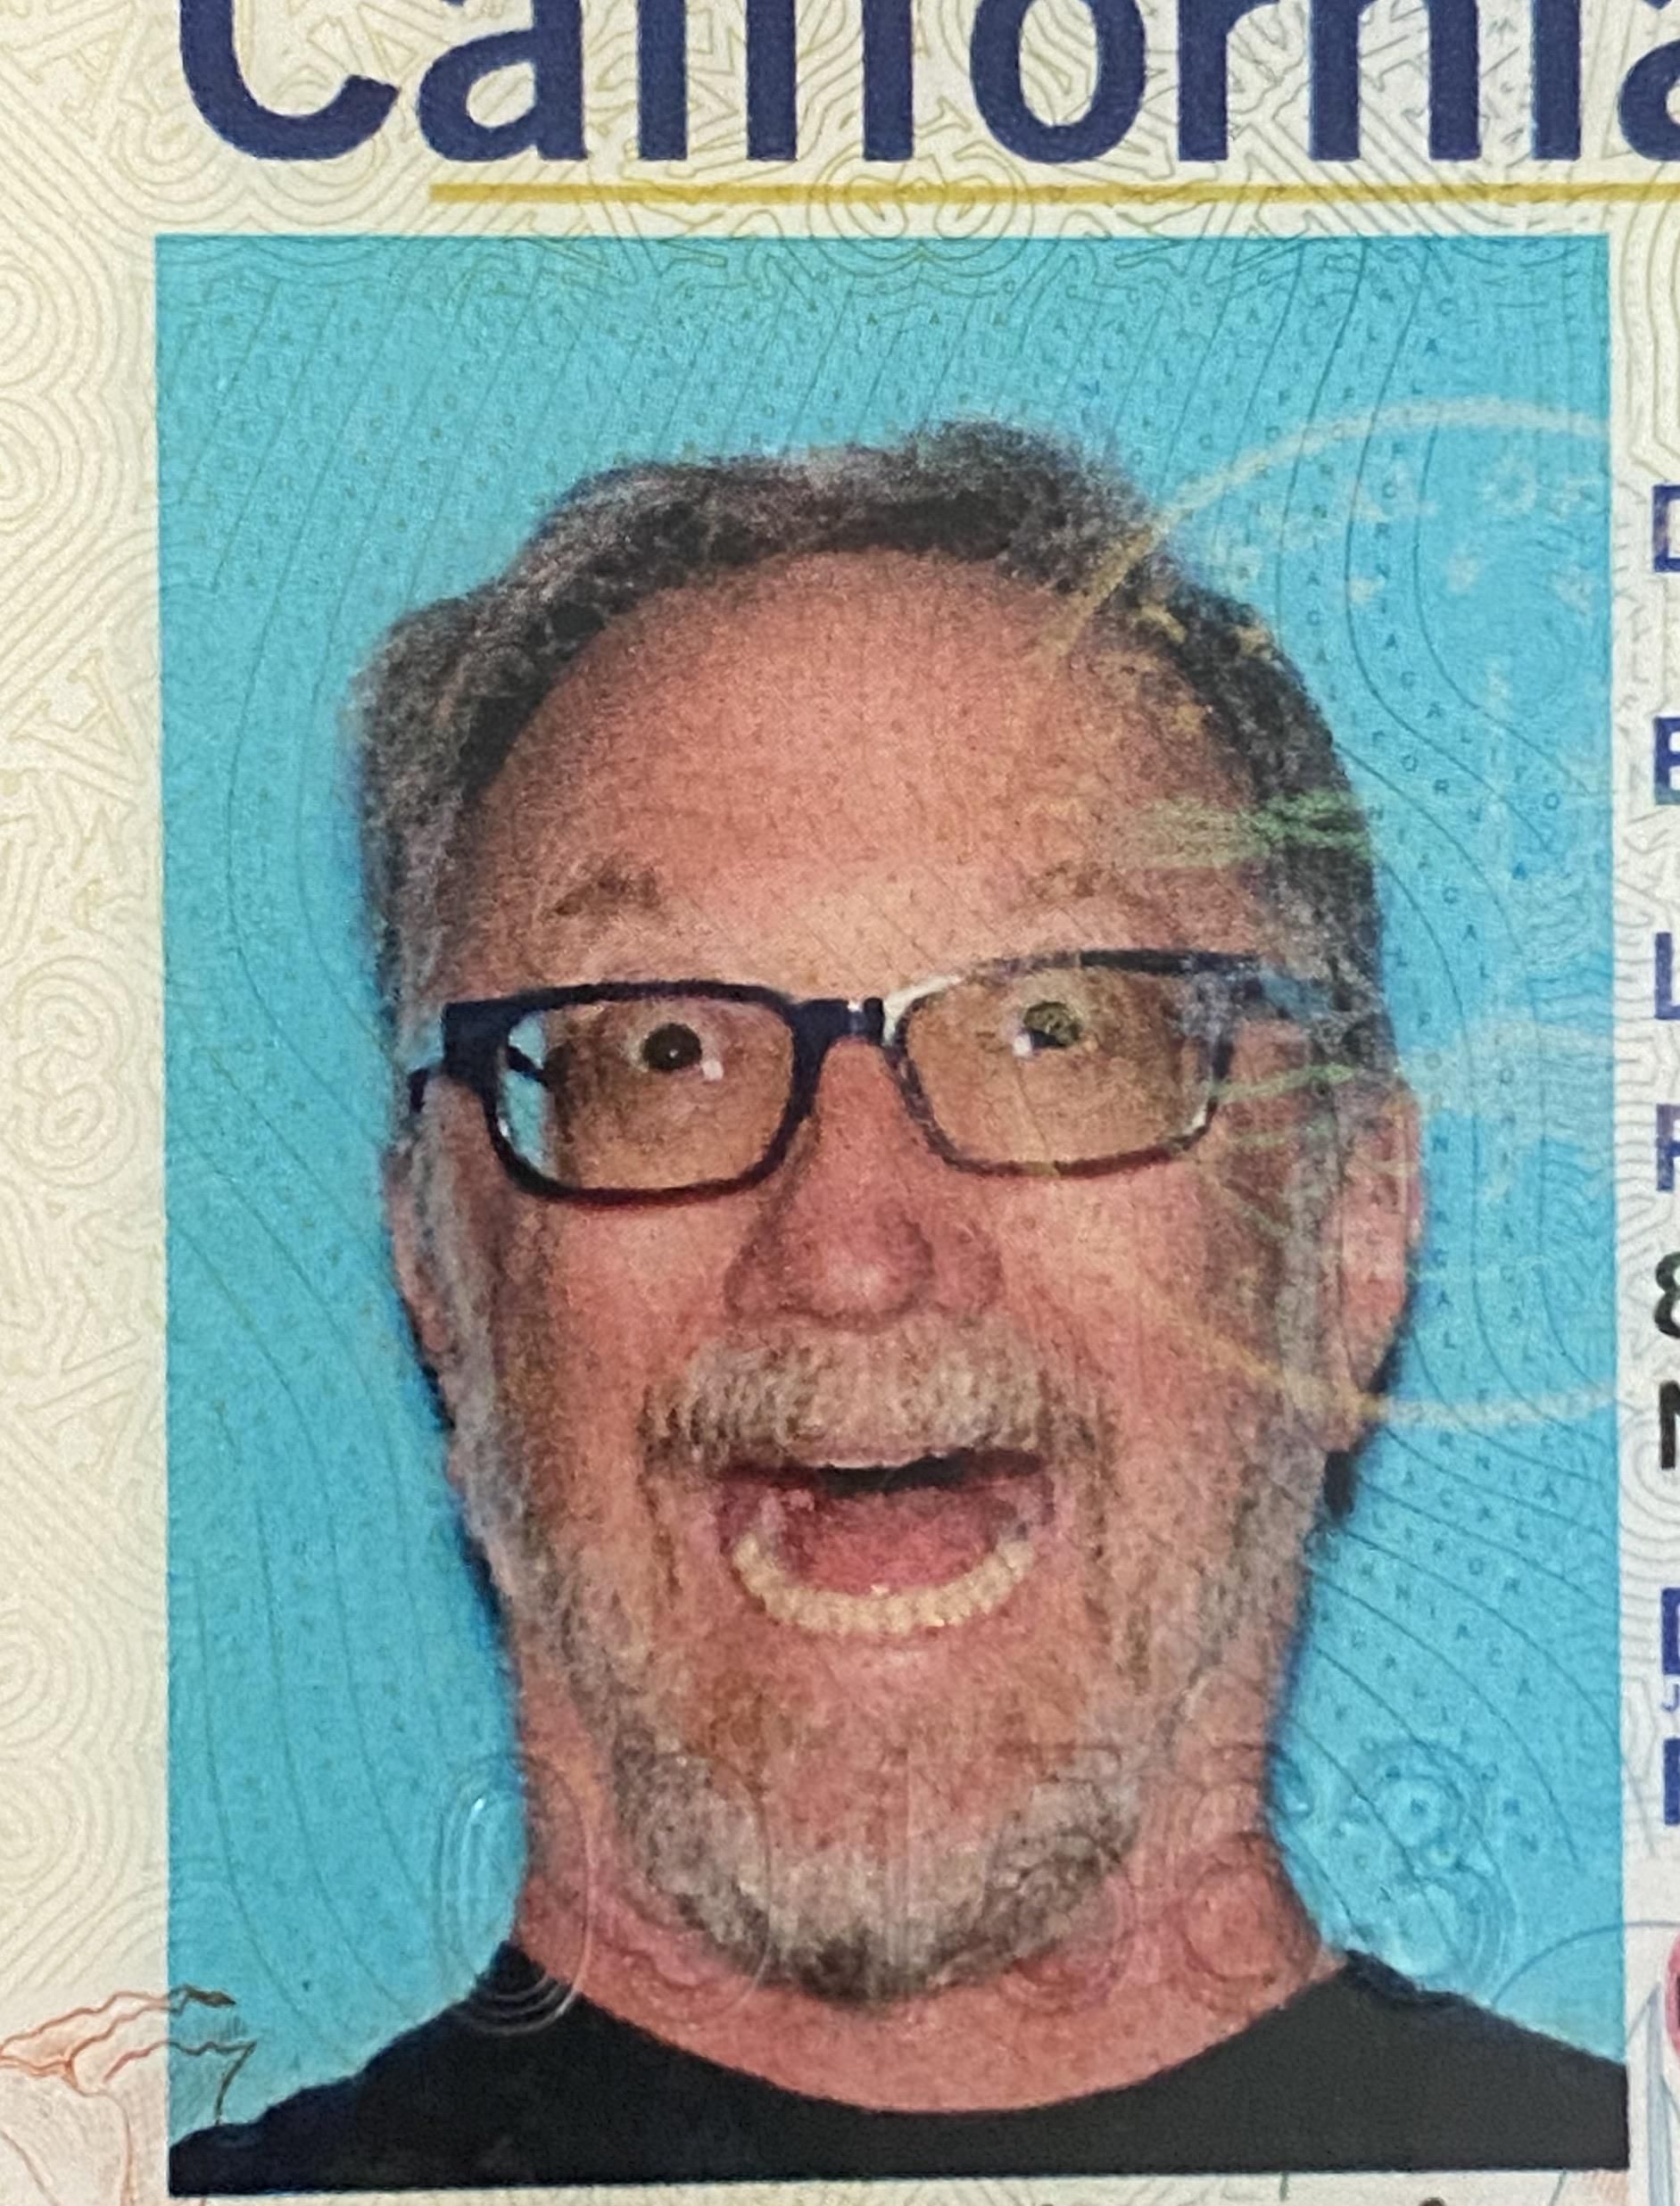 My DMV agent was very nice and let me have some fun with my picture.